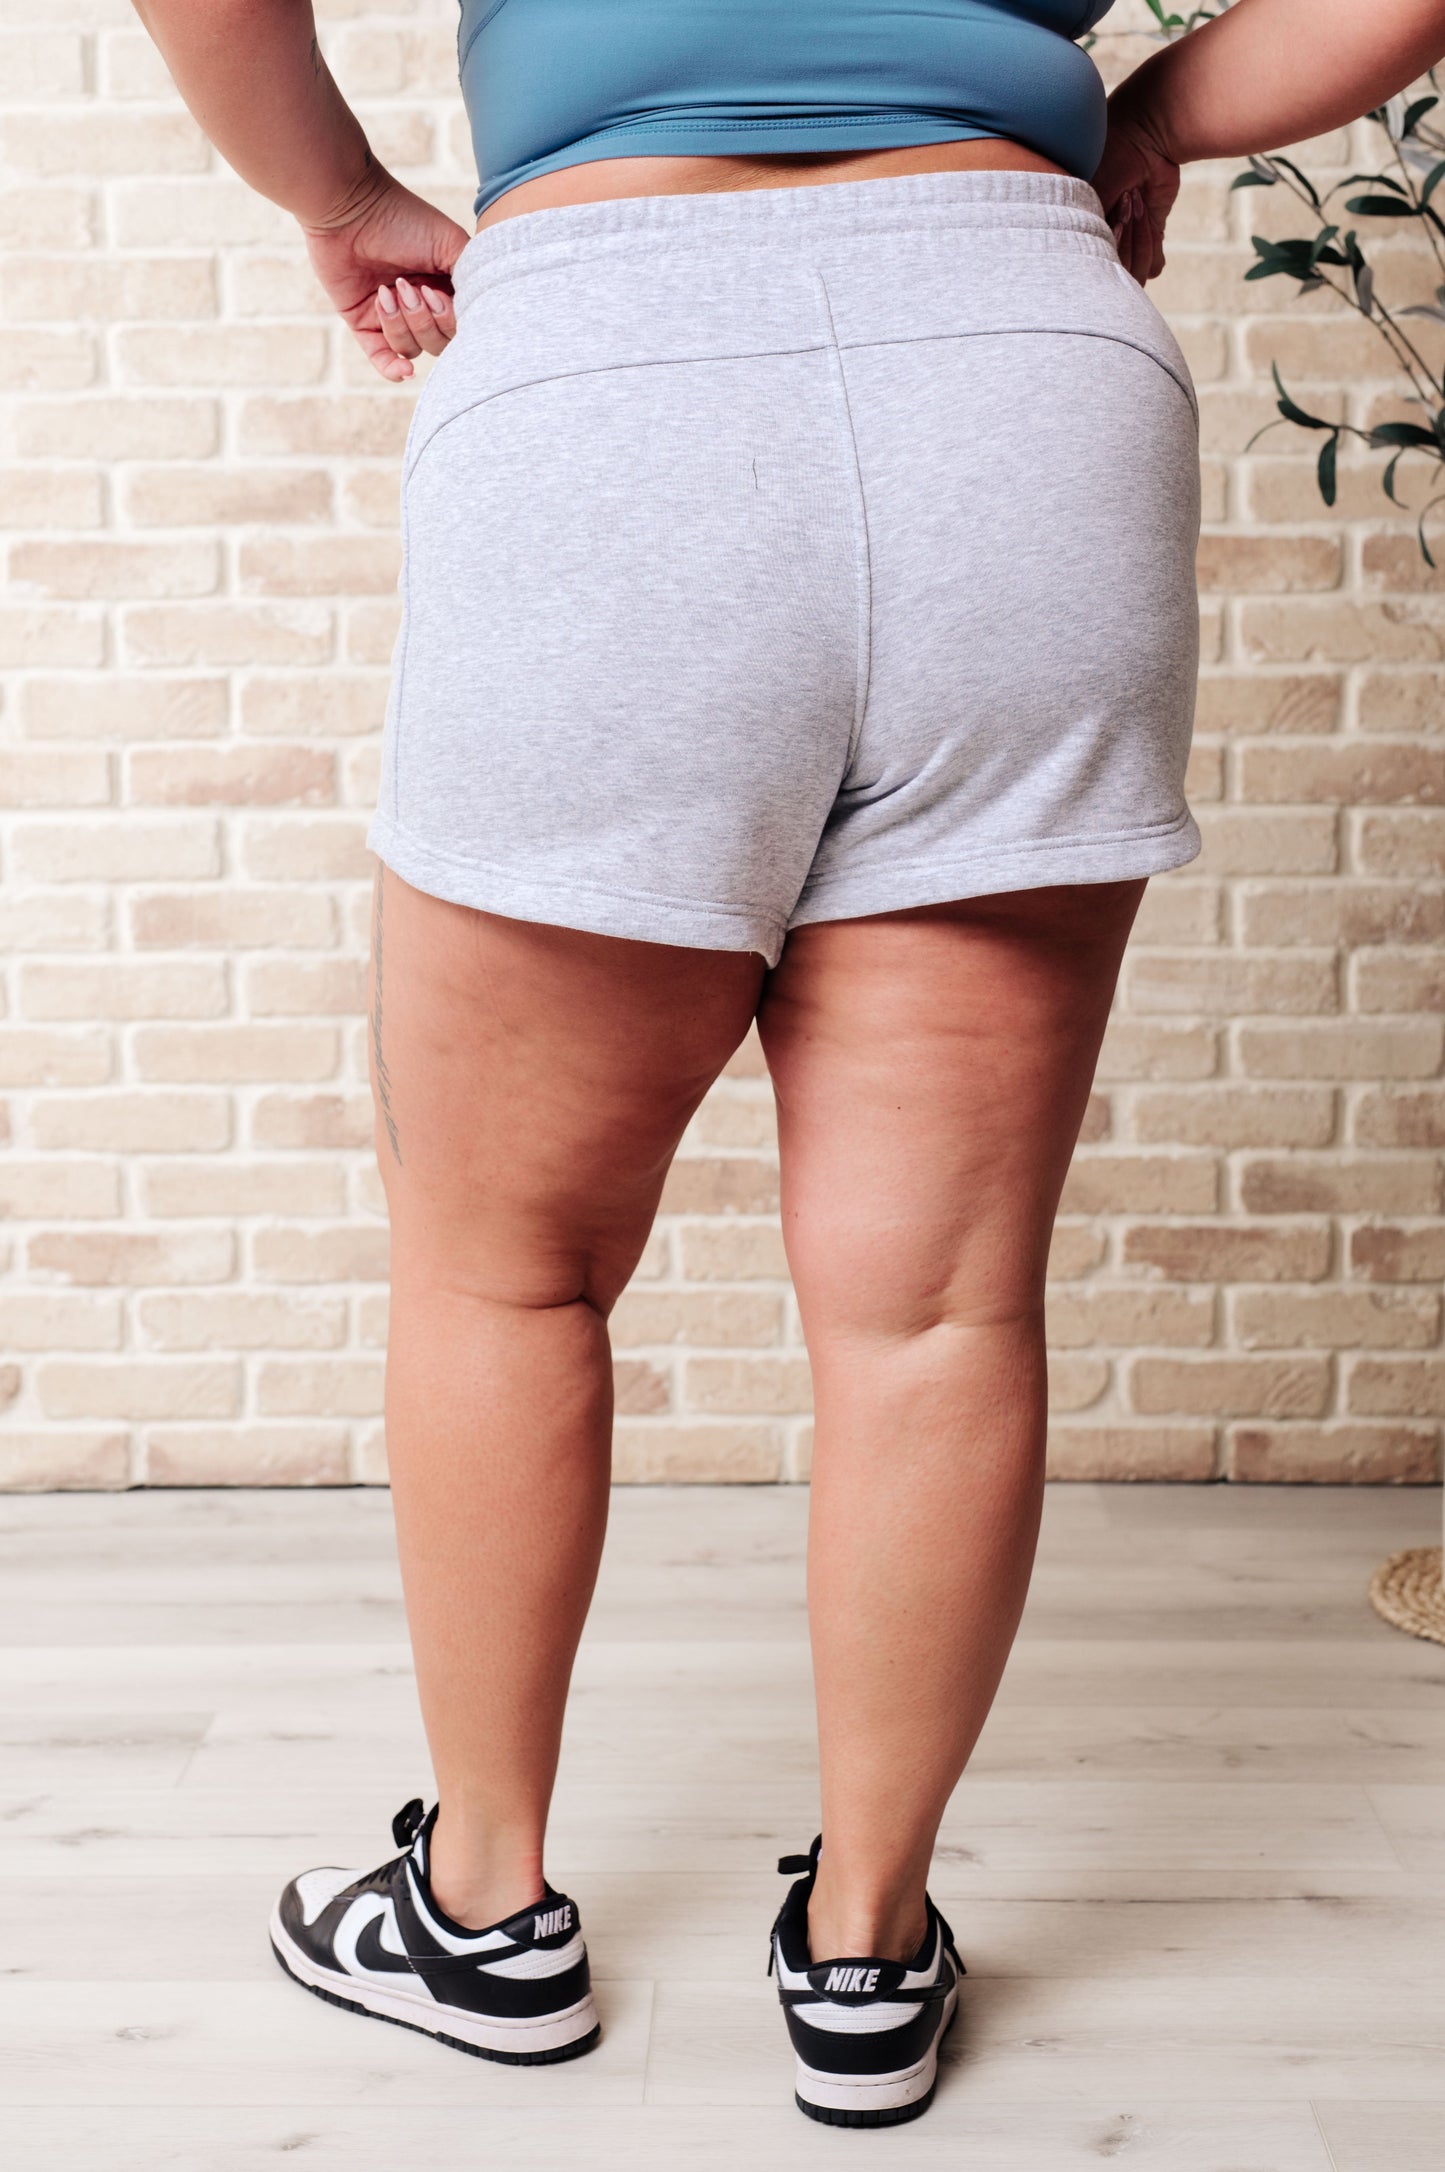 We're Only Getting Better Drawstring Shorts in Grey